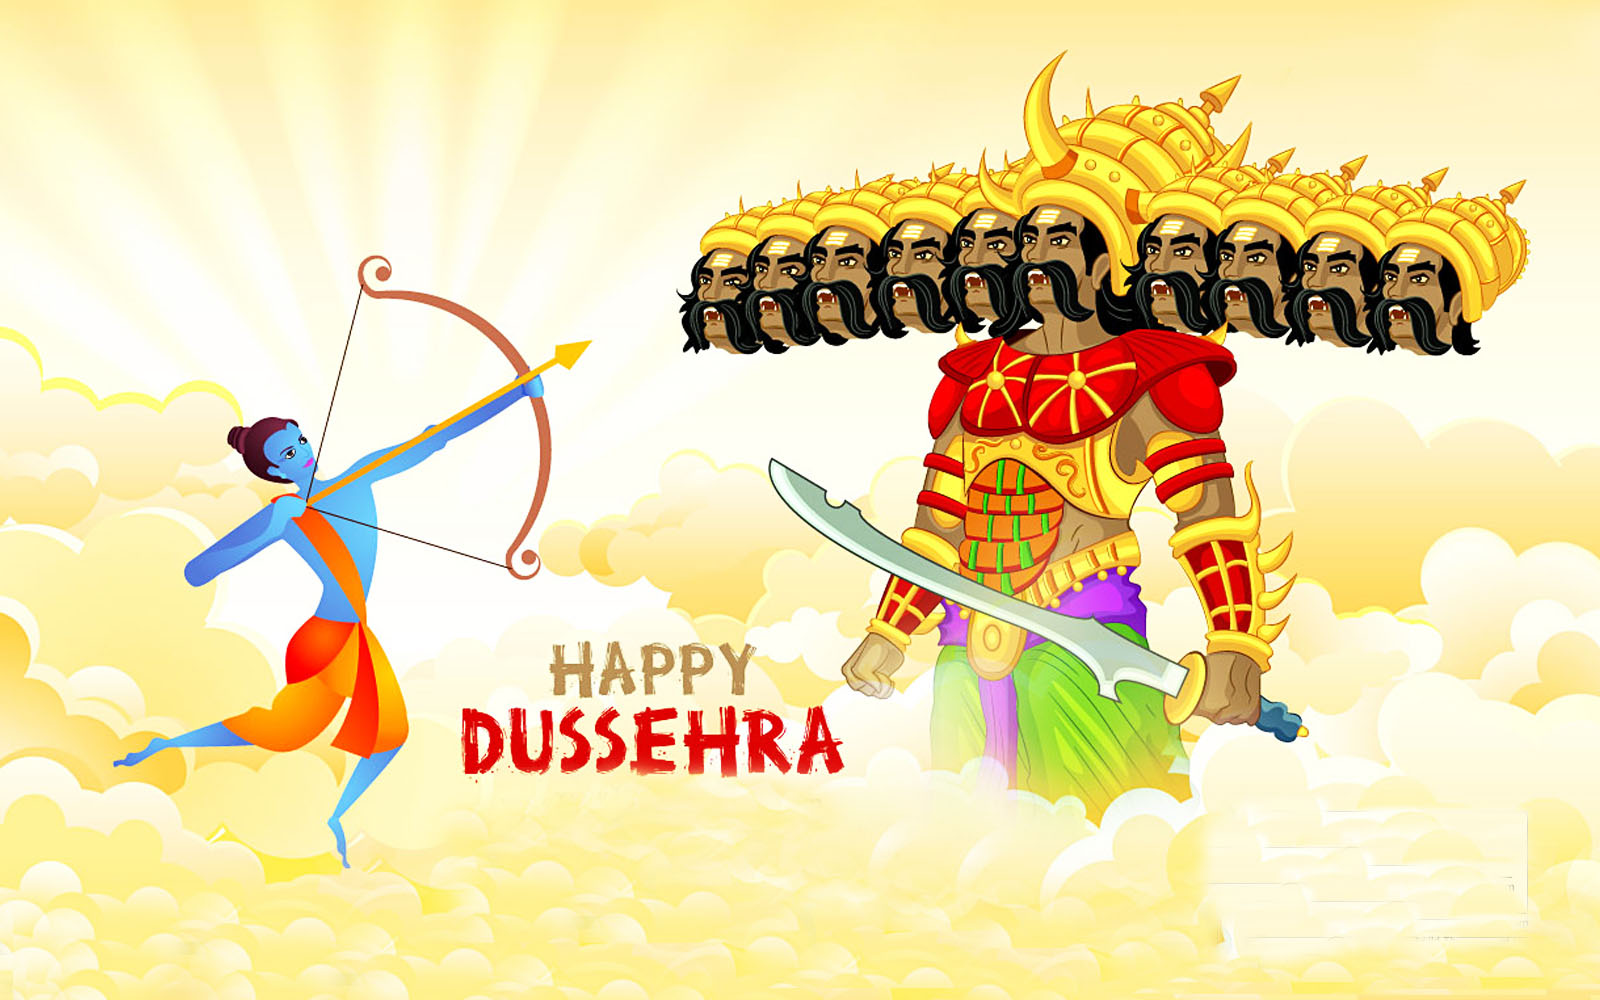 why we celebrate dussehra festival in India